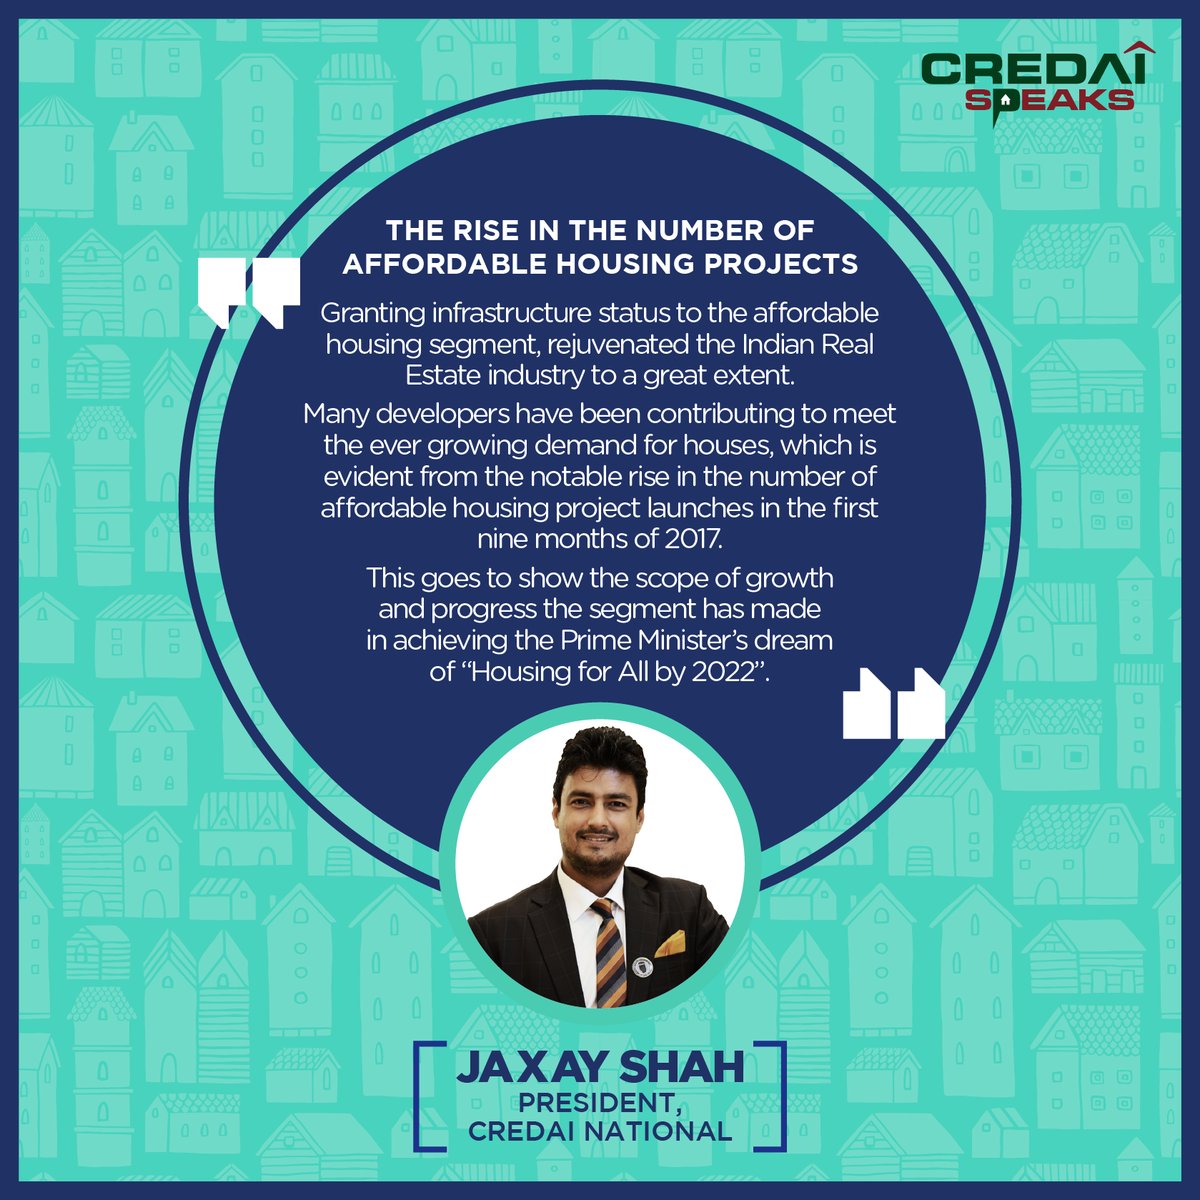 RT @CREDAINational: Our President @jaxayshah shares his views on the recent boost in #AffordableHousing projects. https://t.co/ZwAKkA27Ko